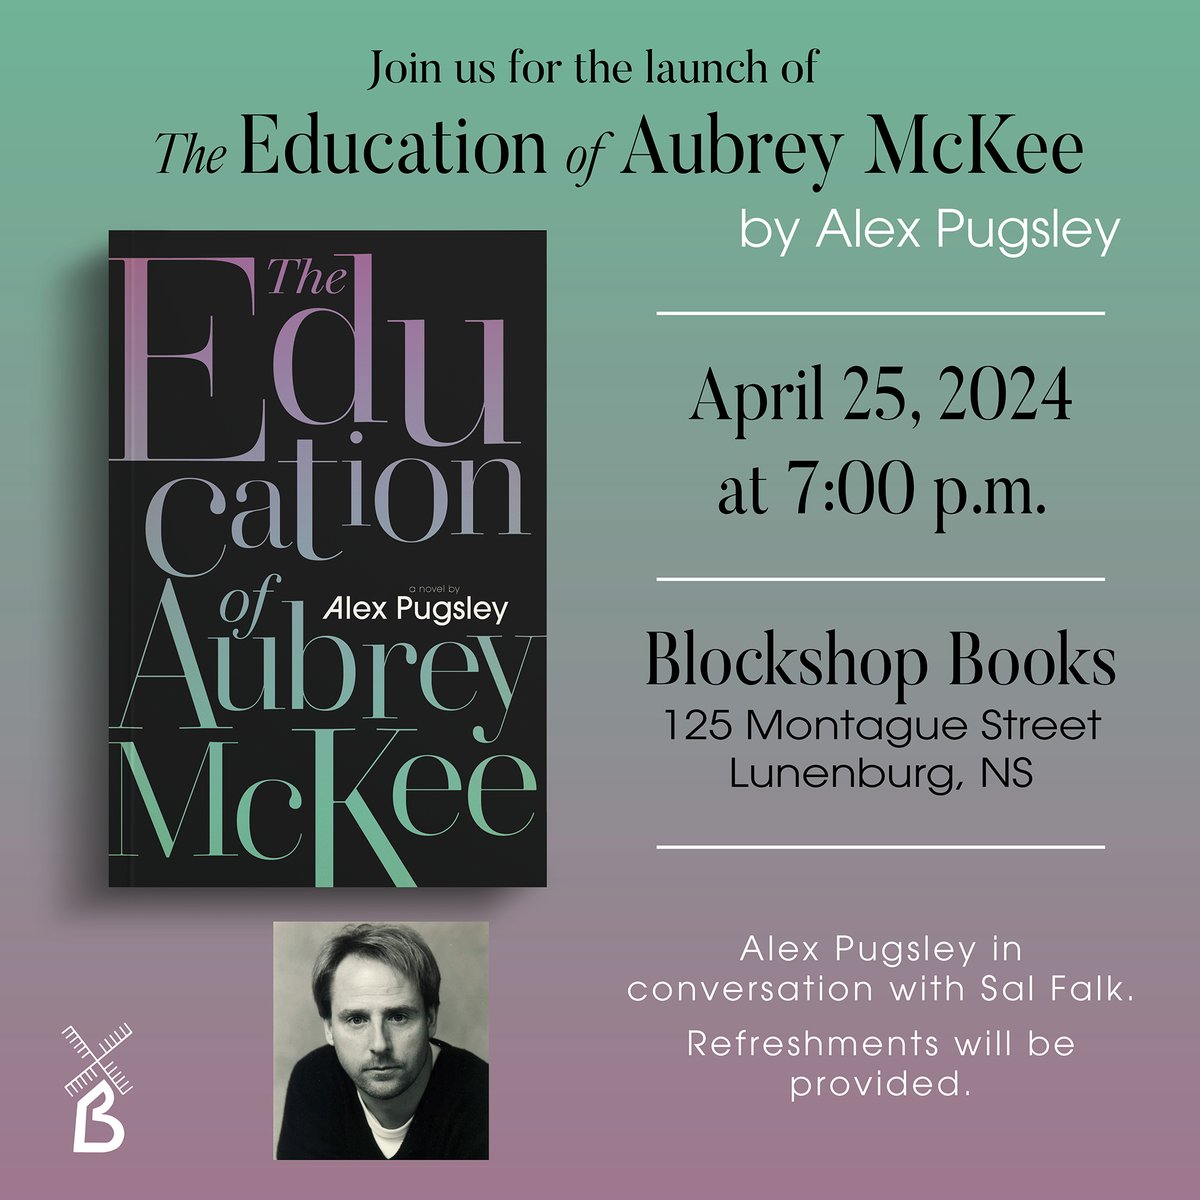 Hi Lunenburg, join us tomorrow at Blockshop Books for @Alex__Pugsley's book launch for THE EDUCATION OF AUBREY MCKEE! Alex Pugsley will be in conversation with writer and editor Sal Falk, with a reading, refreshments, and book signing to follow!